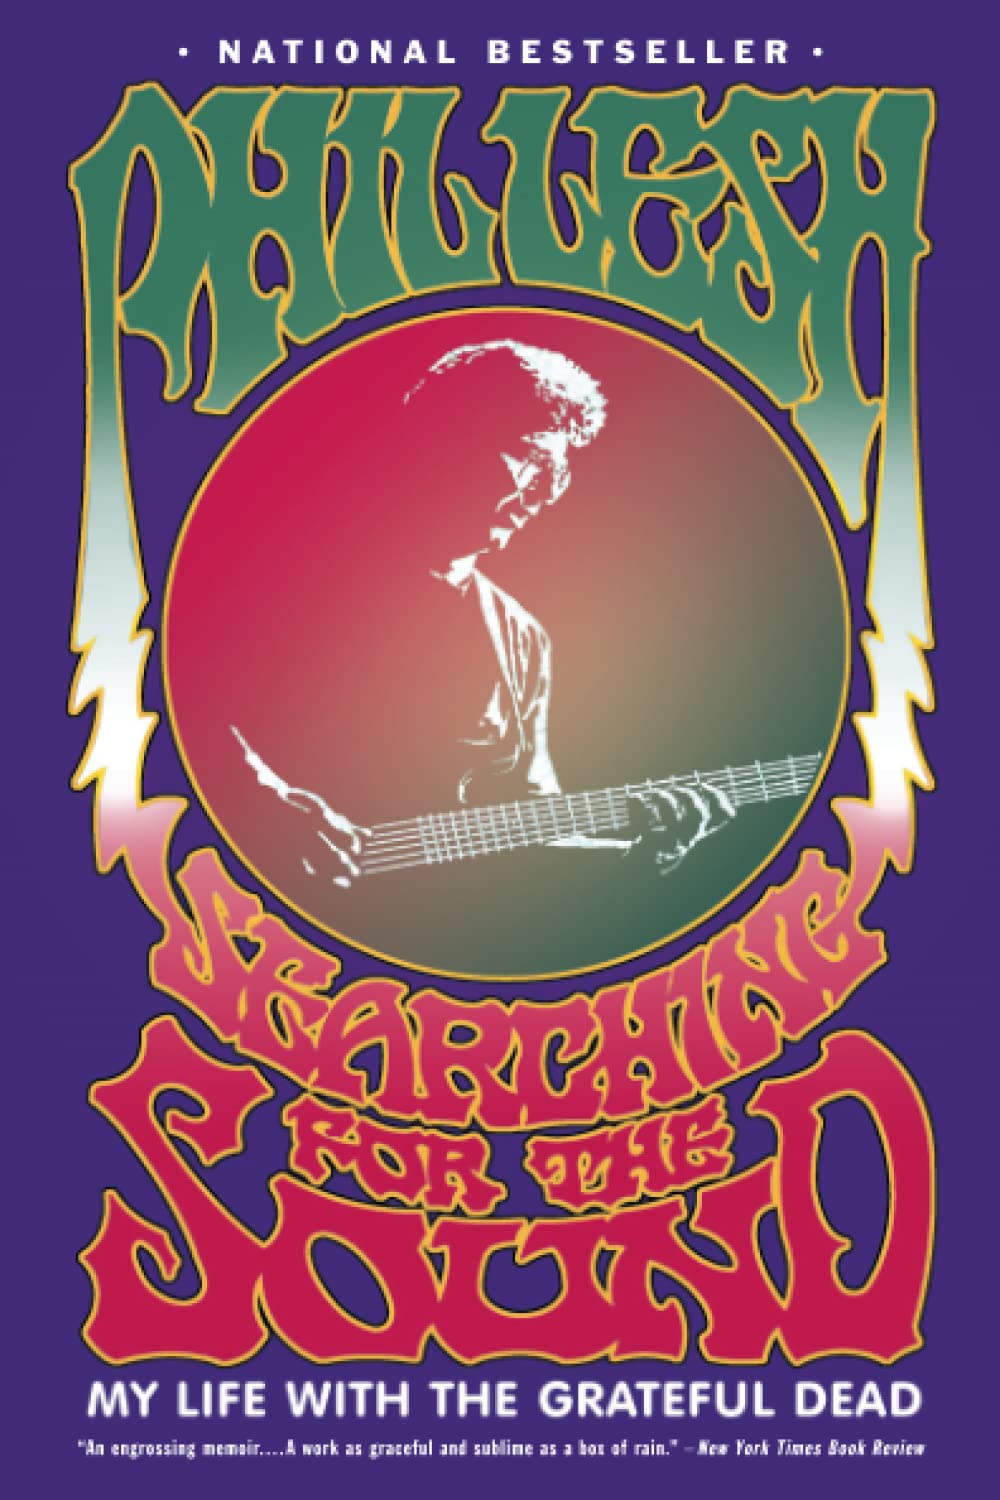 SEARCHING FOR THE SOUND: MY LIFE WITH THE GRATEFUL DEAD